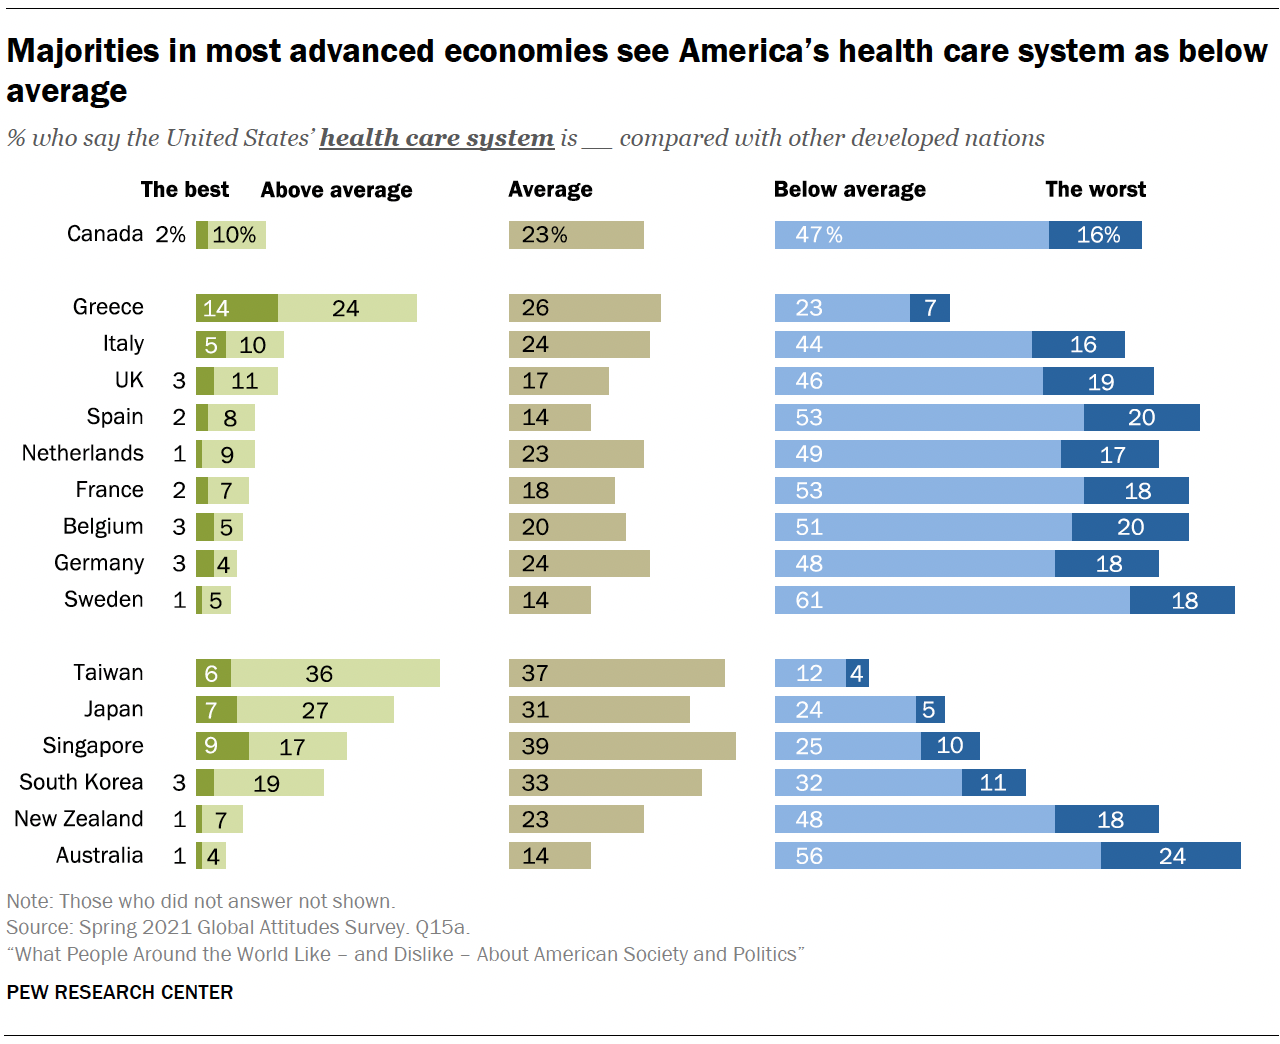 Majorities in most advanced economies see America’s health care system as below average